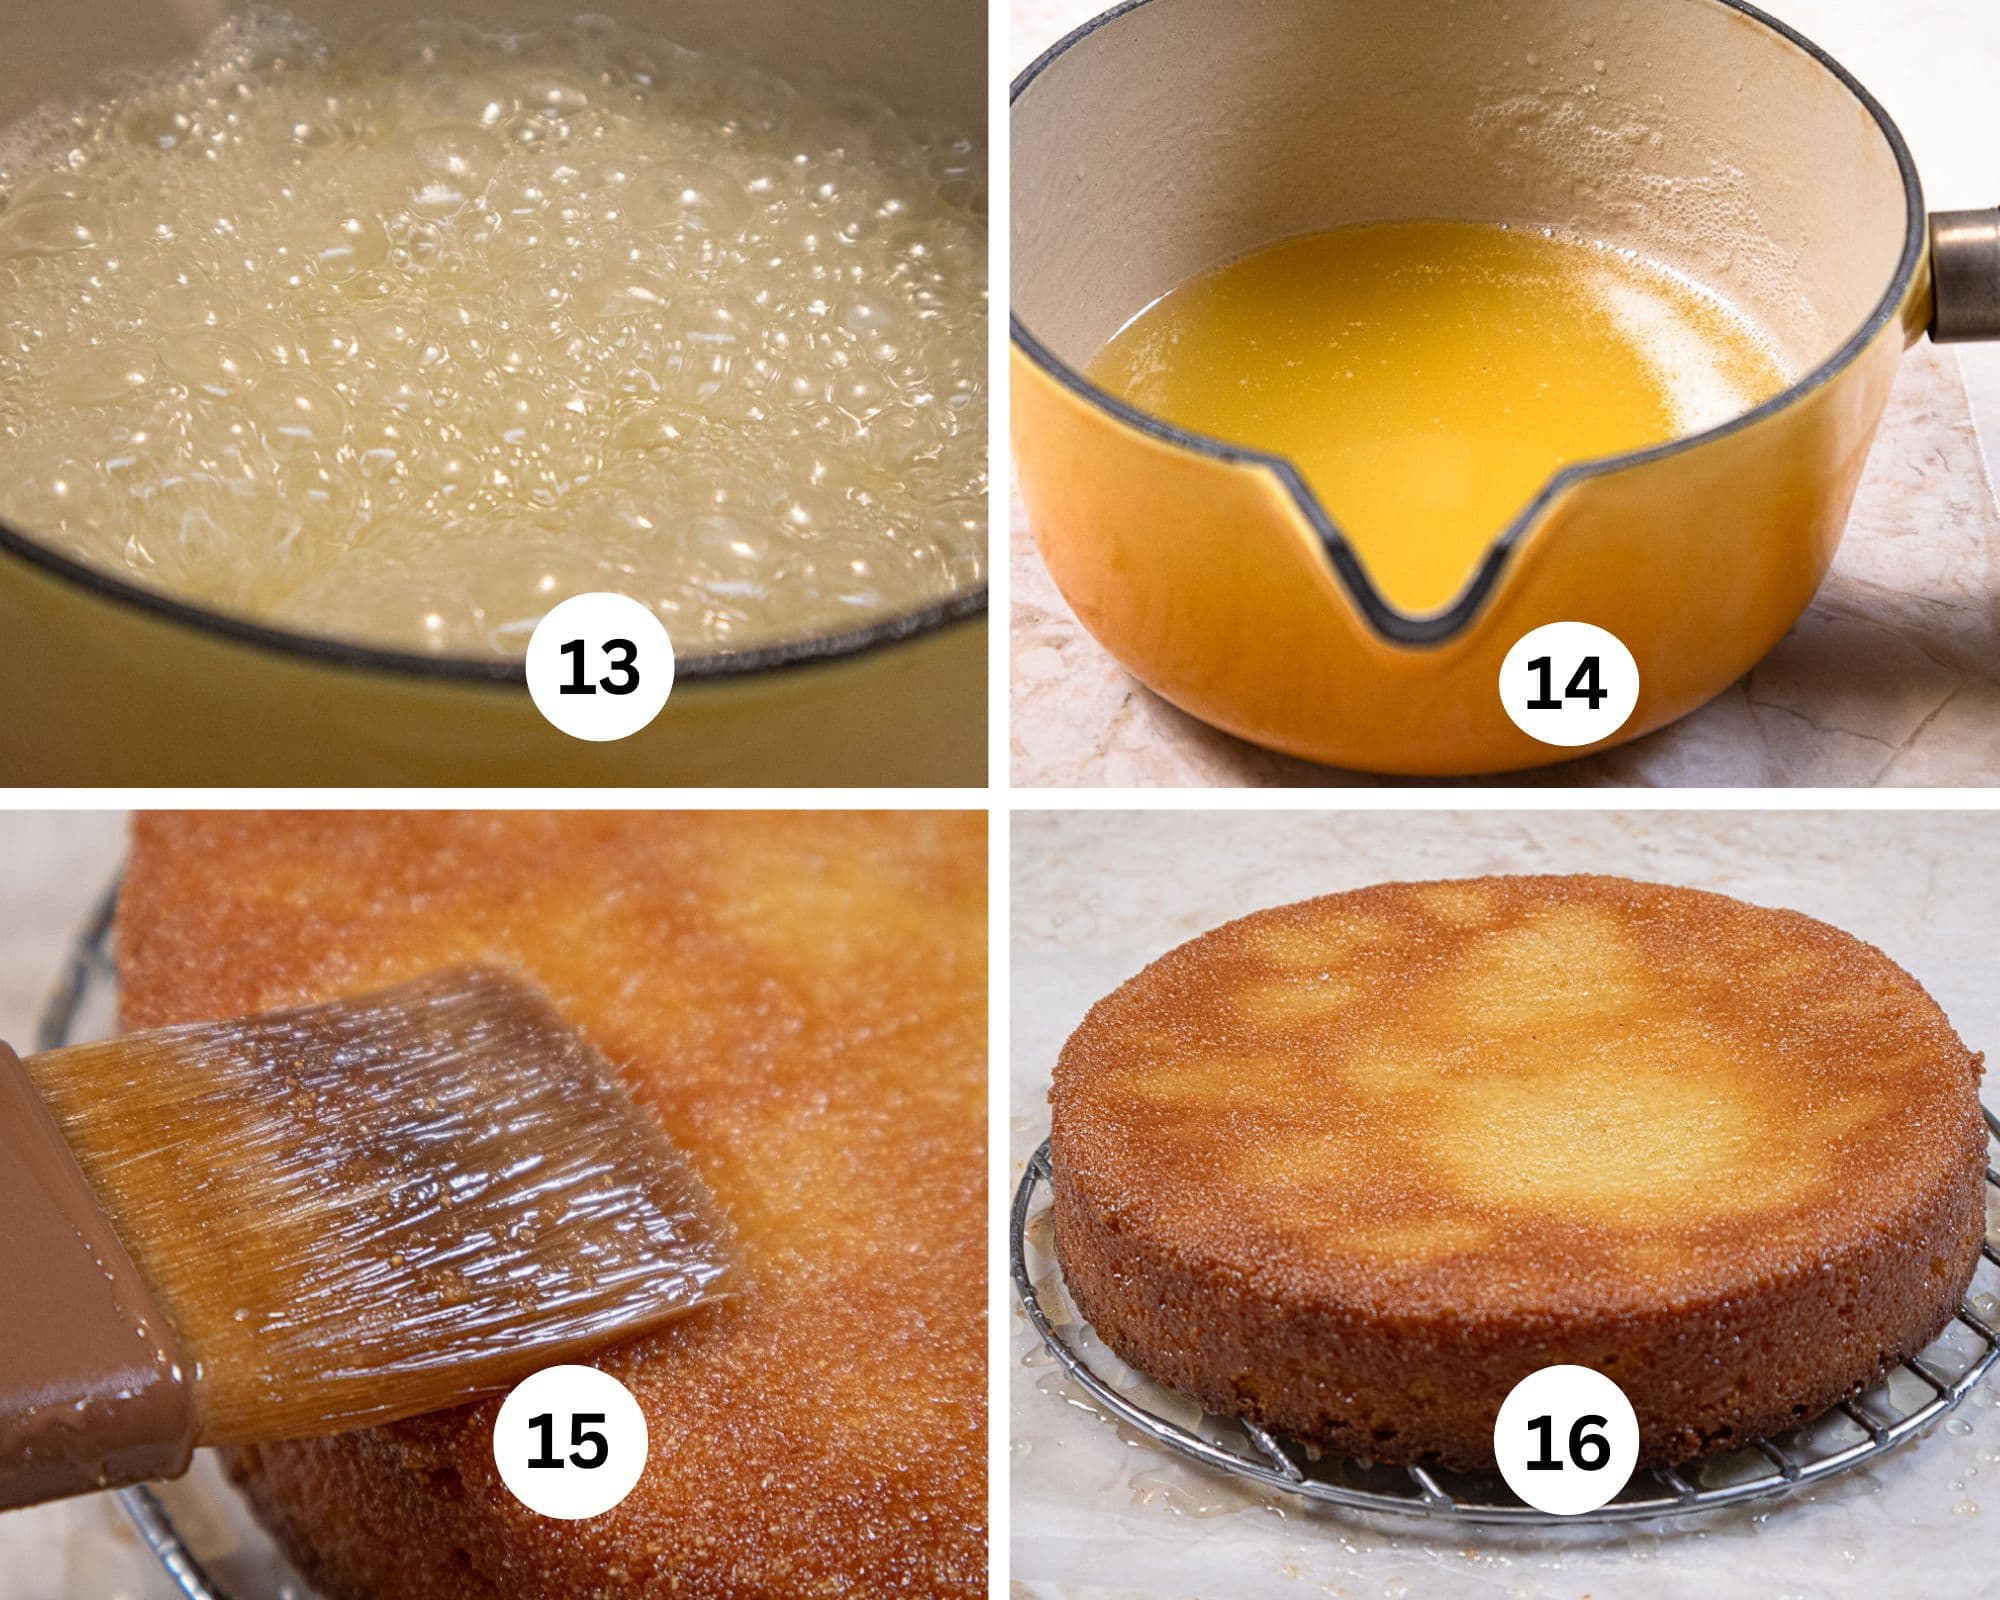 This collages hows the lemon soak boiling, then finished int he pan,being brushed on the cake and the cake totally soaked.